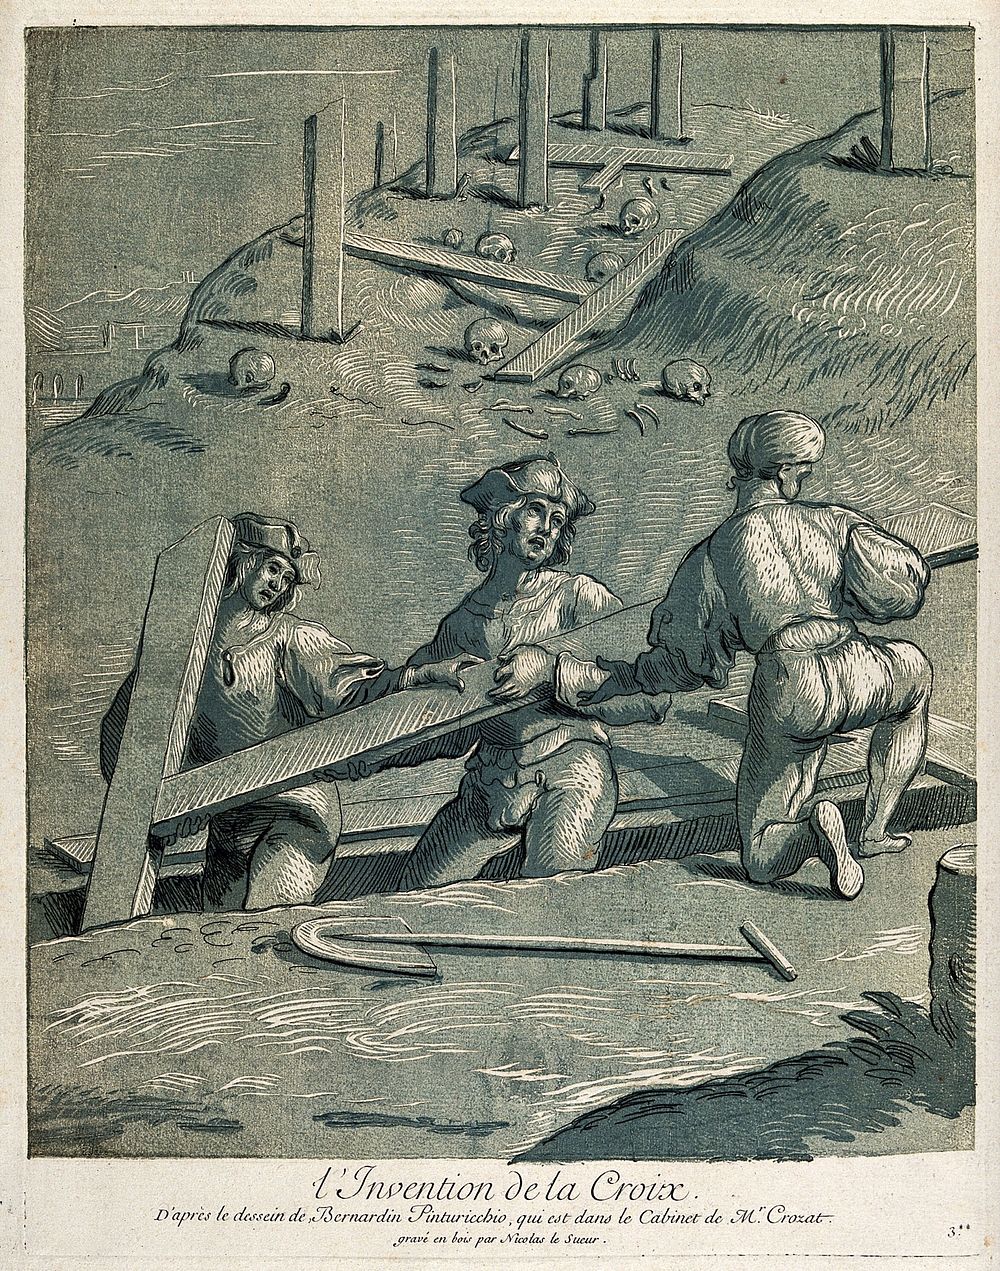 The discovery of the Cross. Colour woodcut by N. Le Sueur after B. Betti, il Pintoricchio.